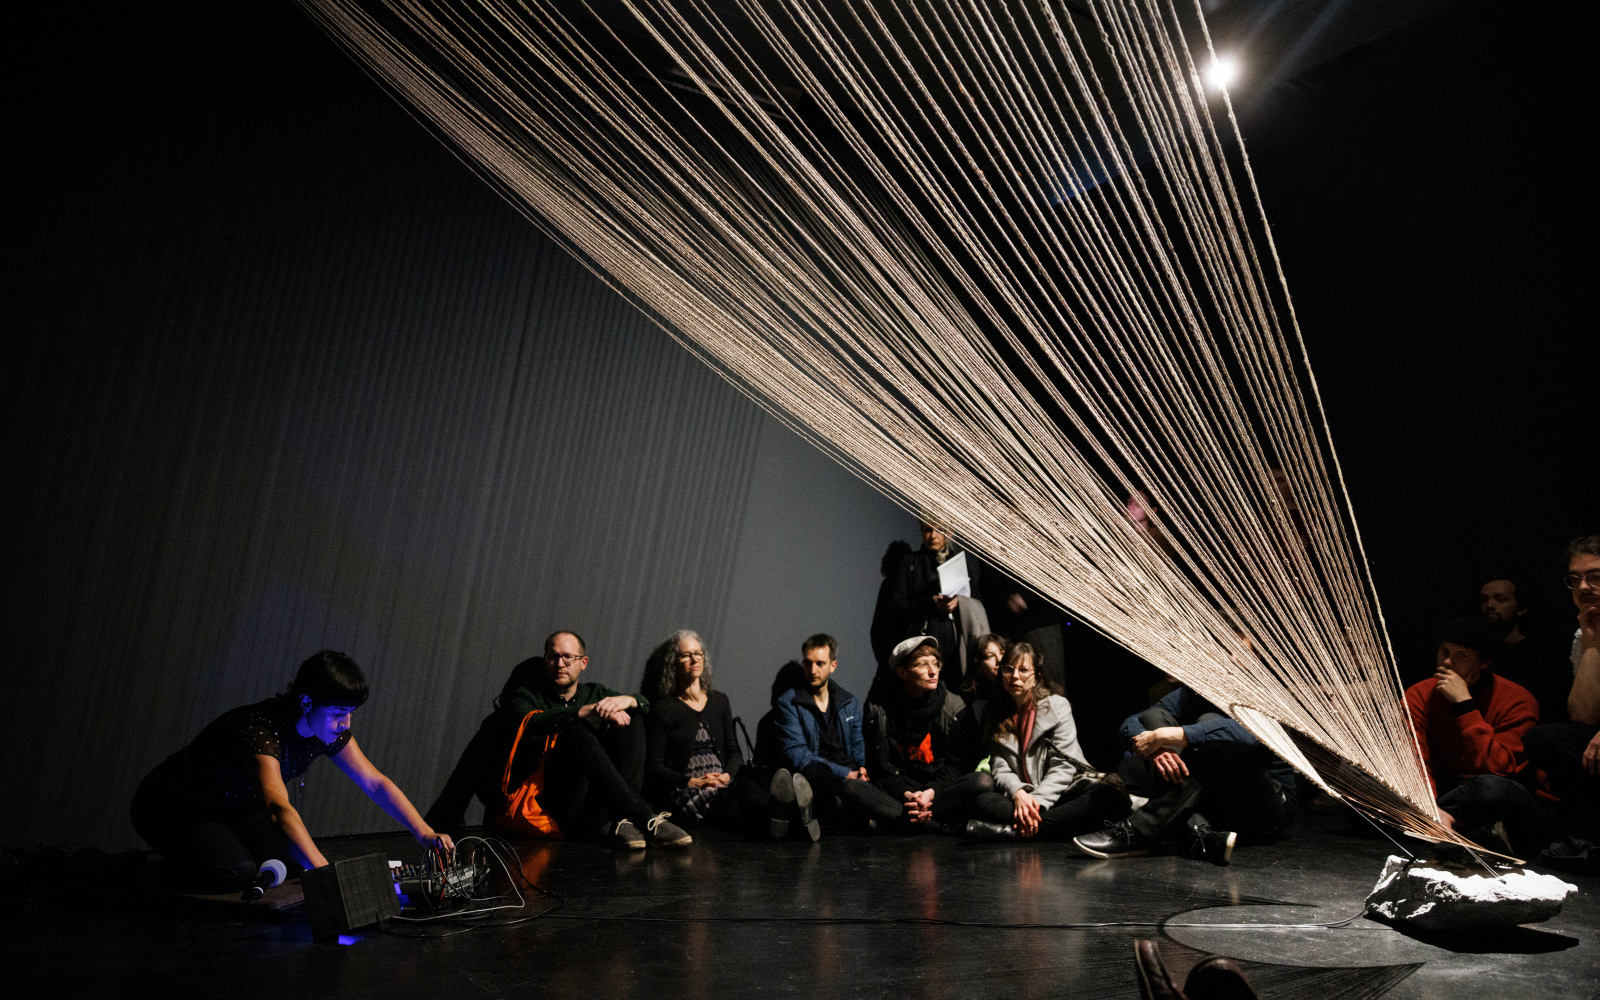 You can see a large, fanned net of threads that reaches up to the ceiling. In the background, several people are sitting against a wall.